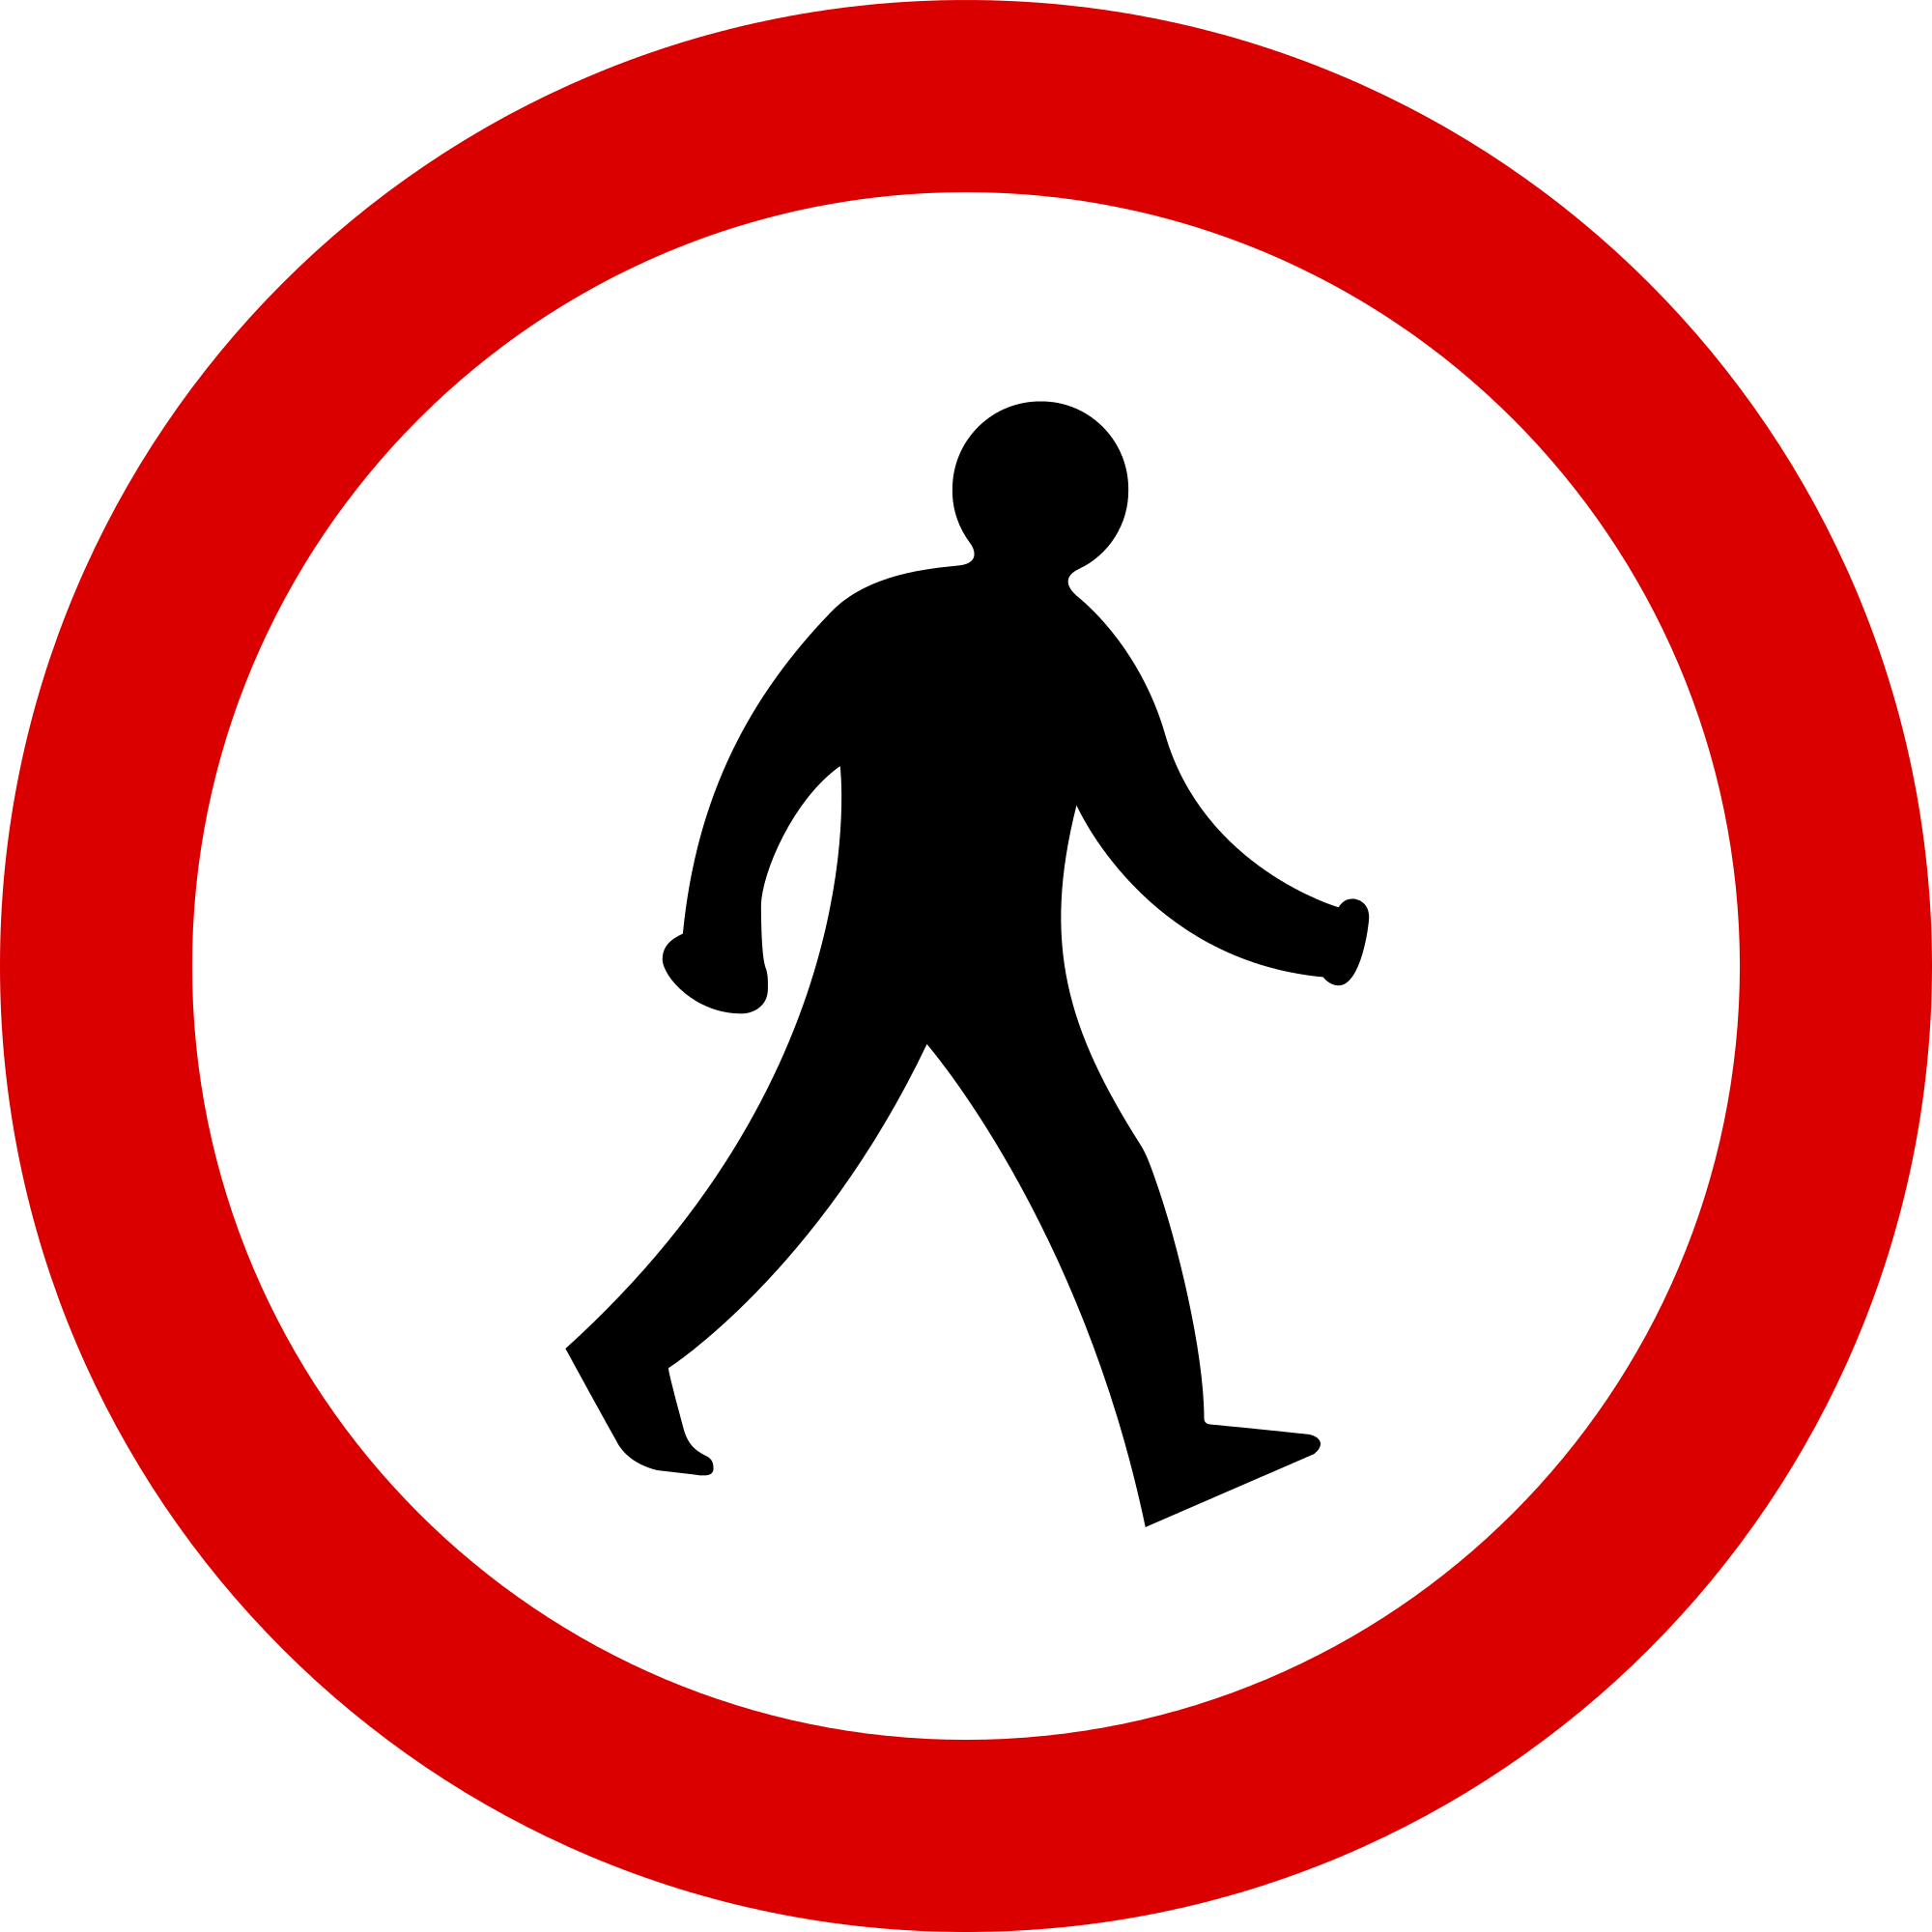 File:Mauritius Road Signs - Prohibitory Sign - No entry for ...